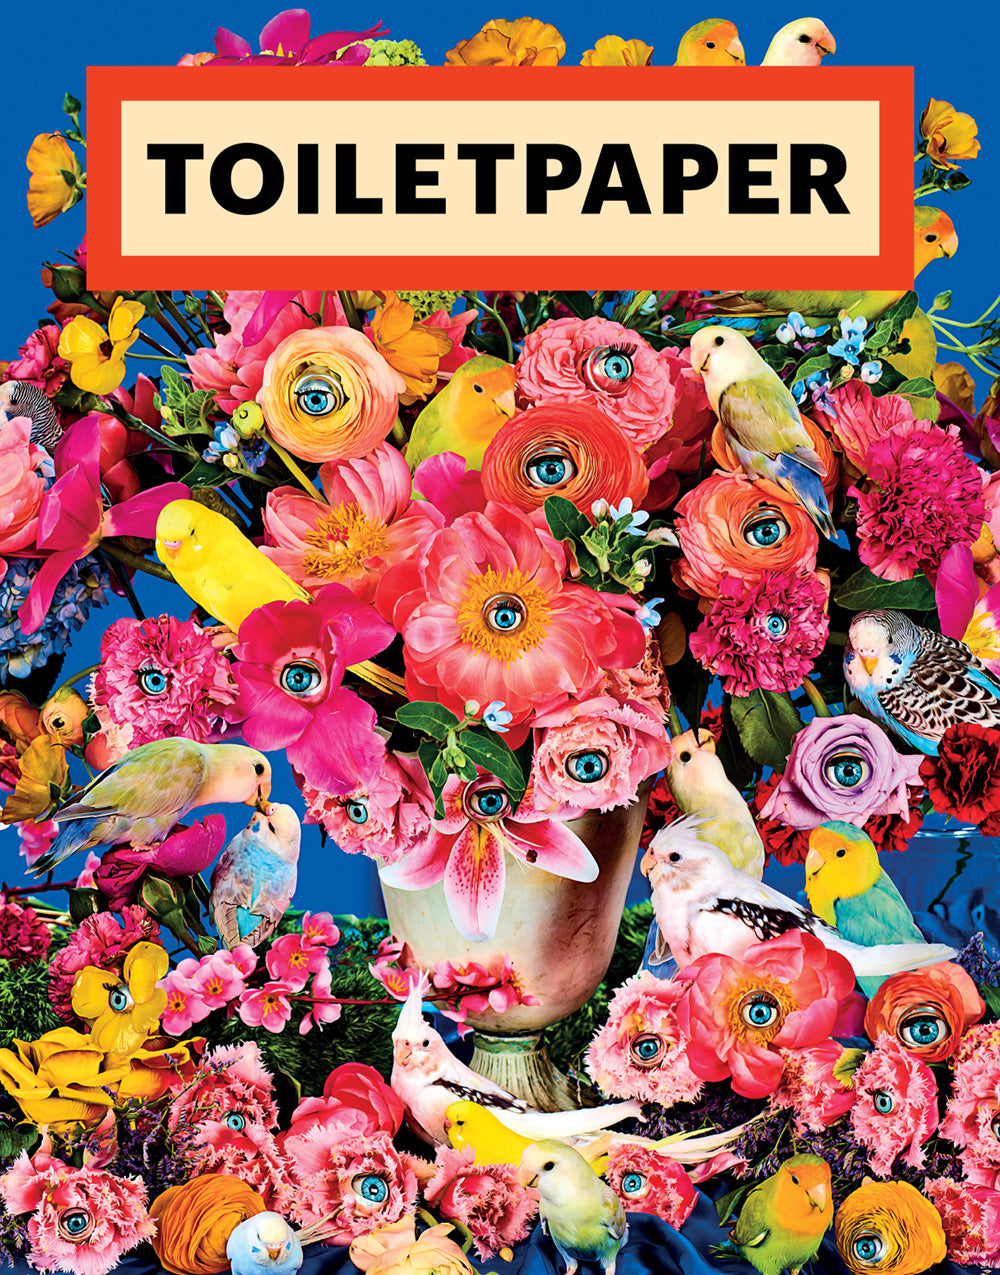 Toilet Paper: Issue 19